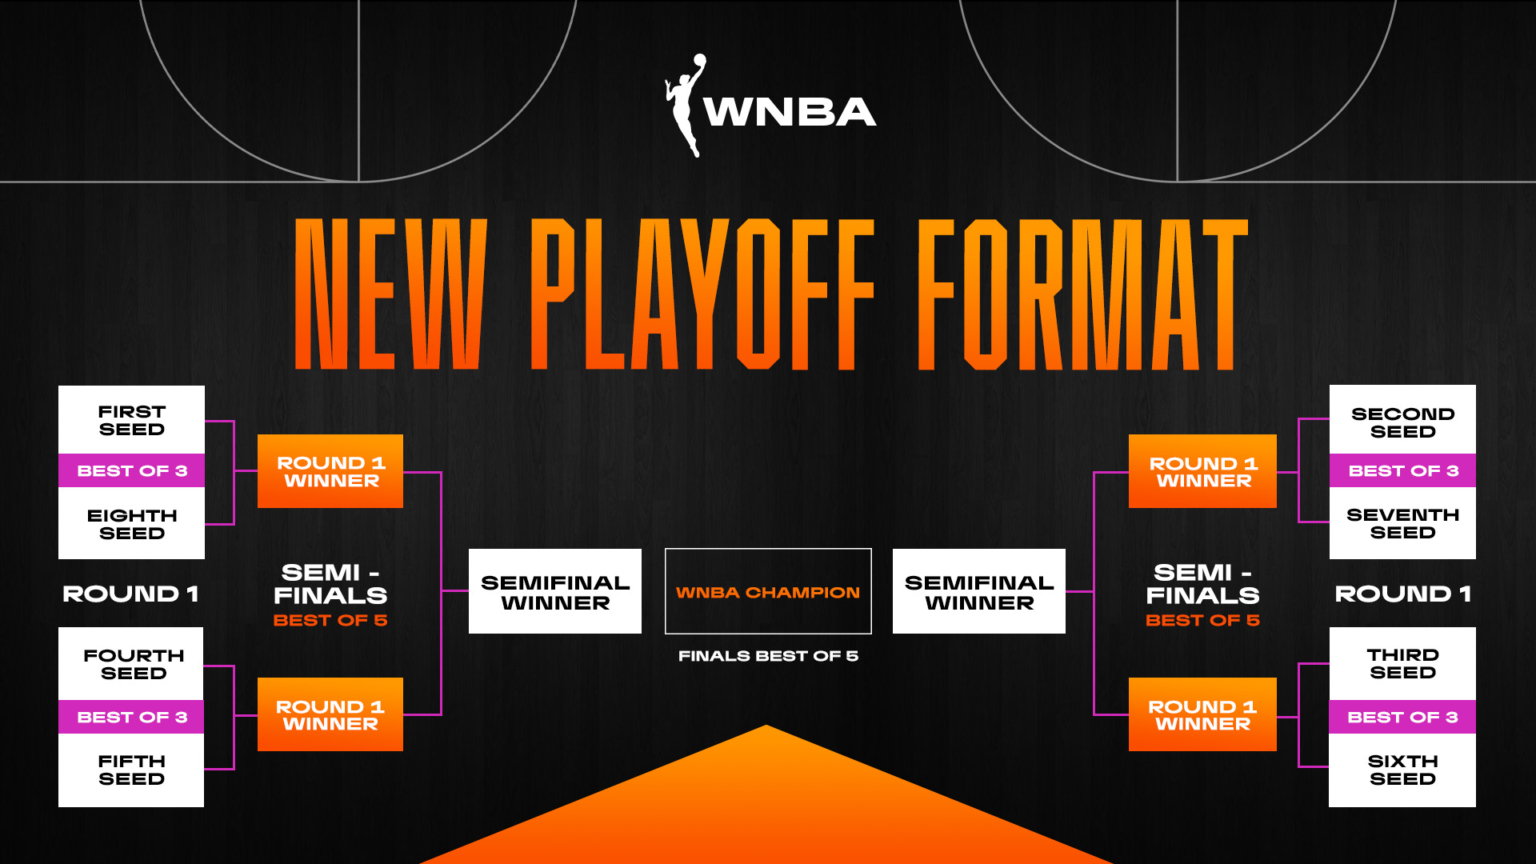 The WNBA approved changes to the league’s playoff format and postseason